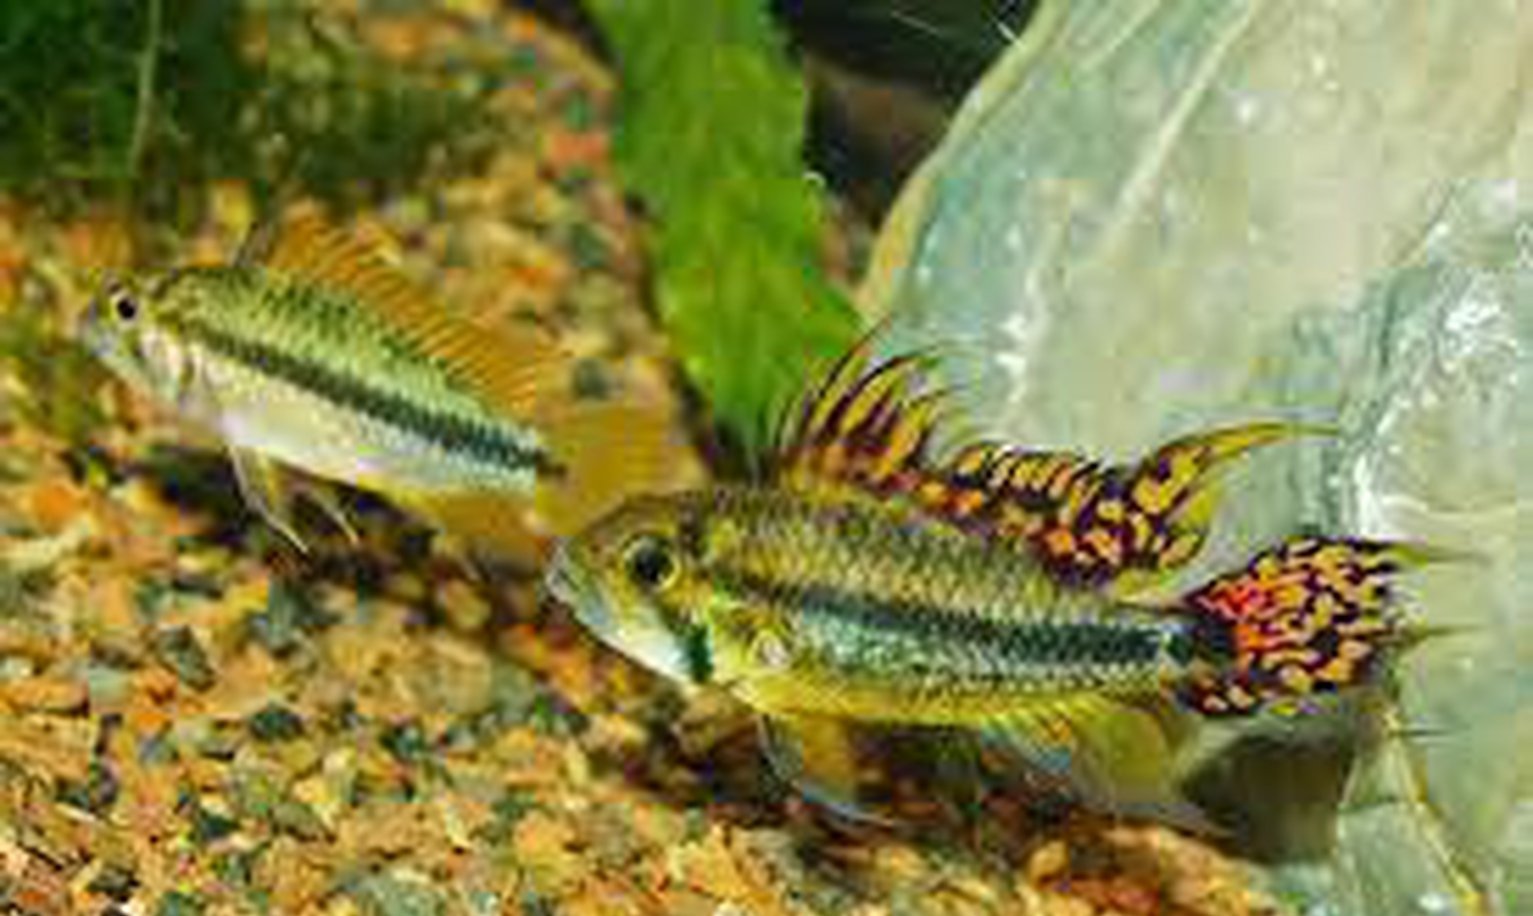 x1 Pair Package - Double Red Apisto Cacatouides Cichlid Pair Sml 1"- 1 1/2" Each-Cichlid - Apistogramma-www.YourFishStore.com